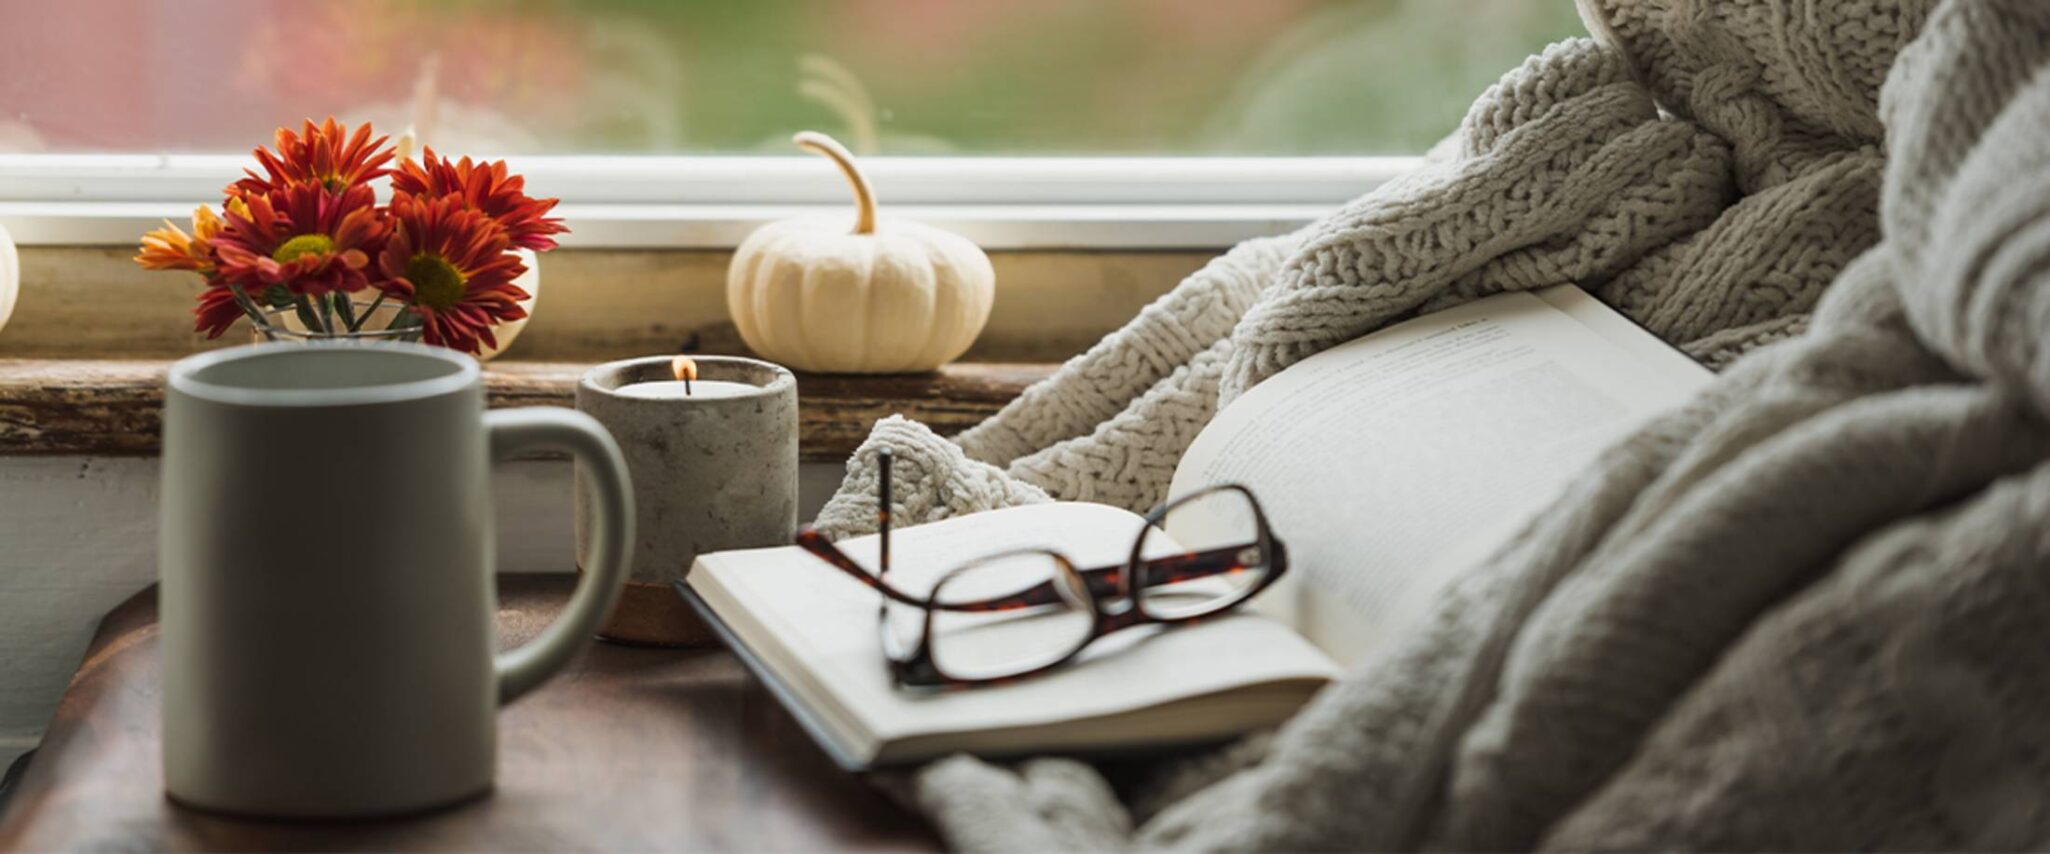 close up of reading glasses laying on an open book surrounded by a candle, coffee mug, flowers, and a small white pumpkin